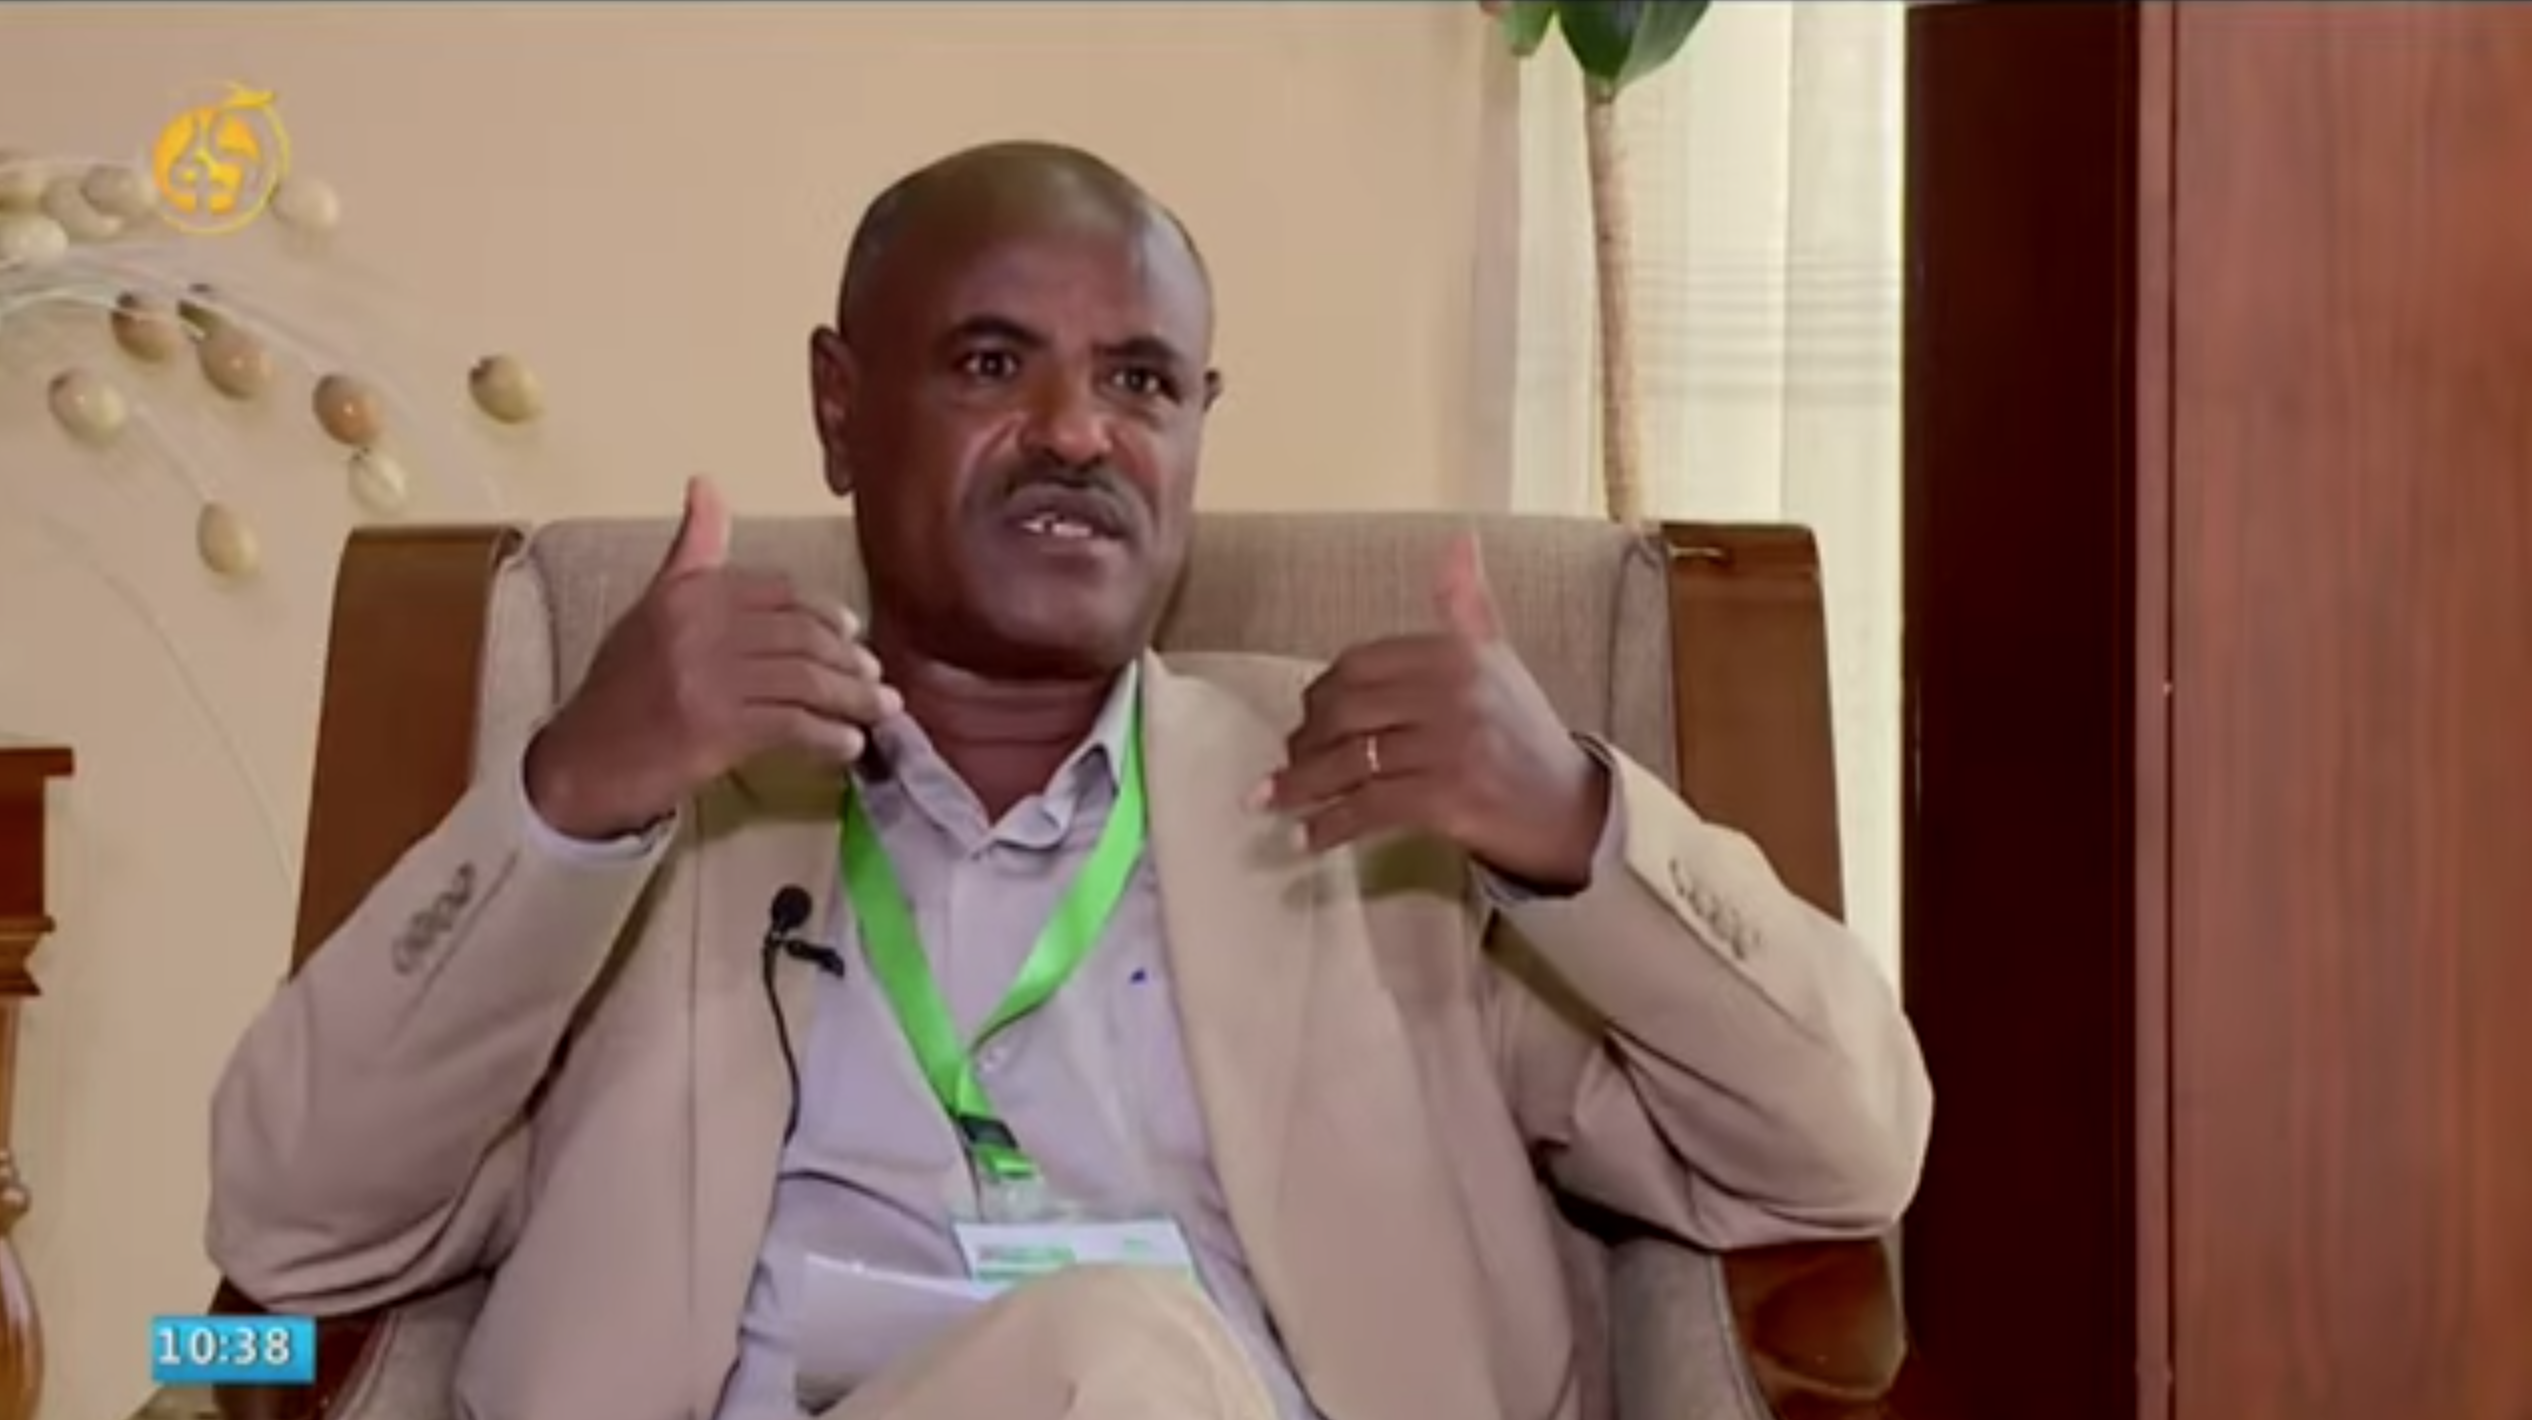 A Tigray interim admin official paints a grim picture of Tigray through the lens of agriculture